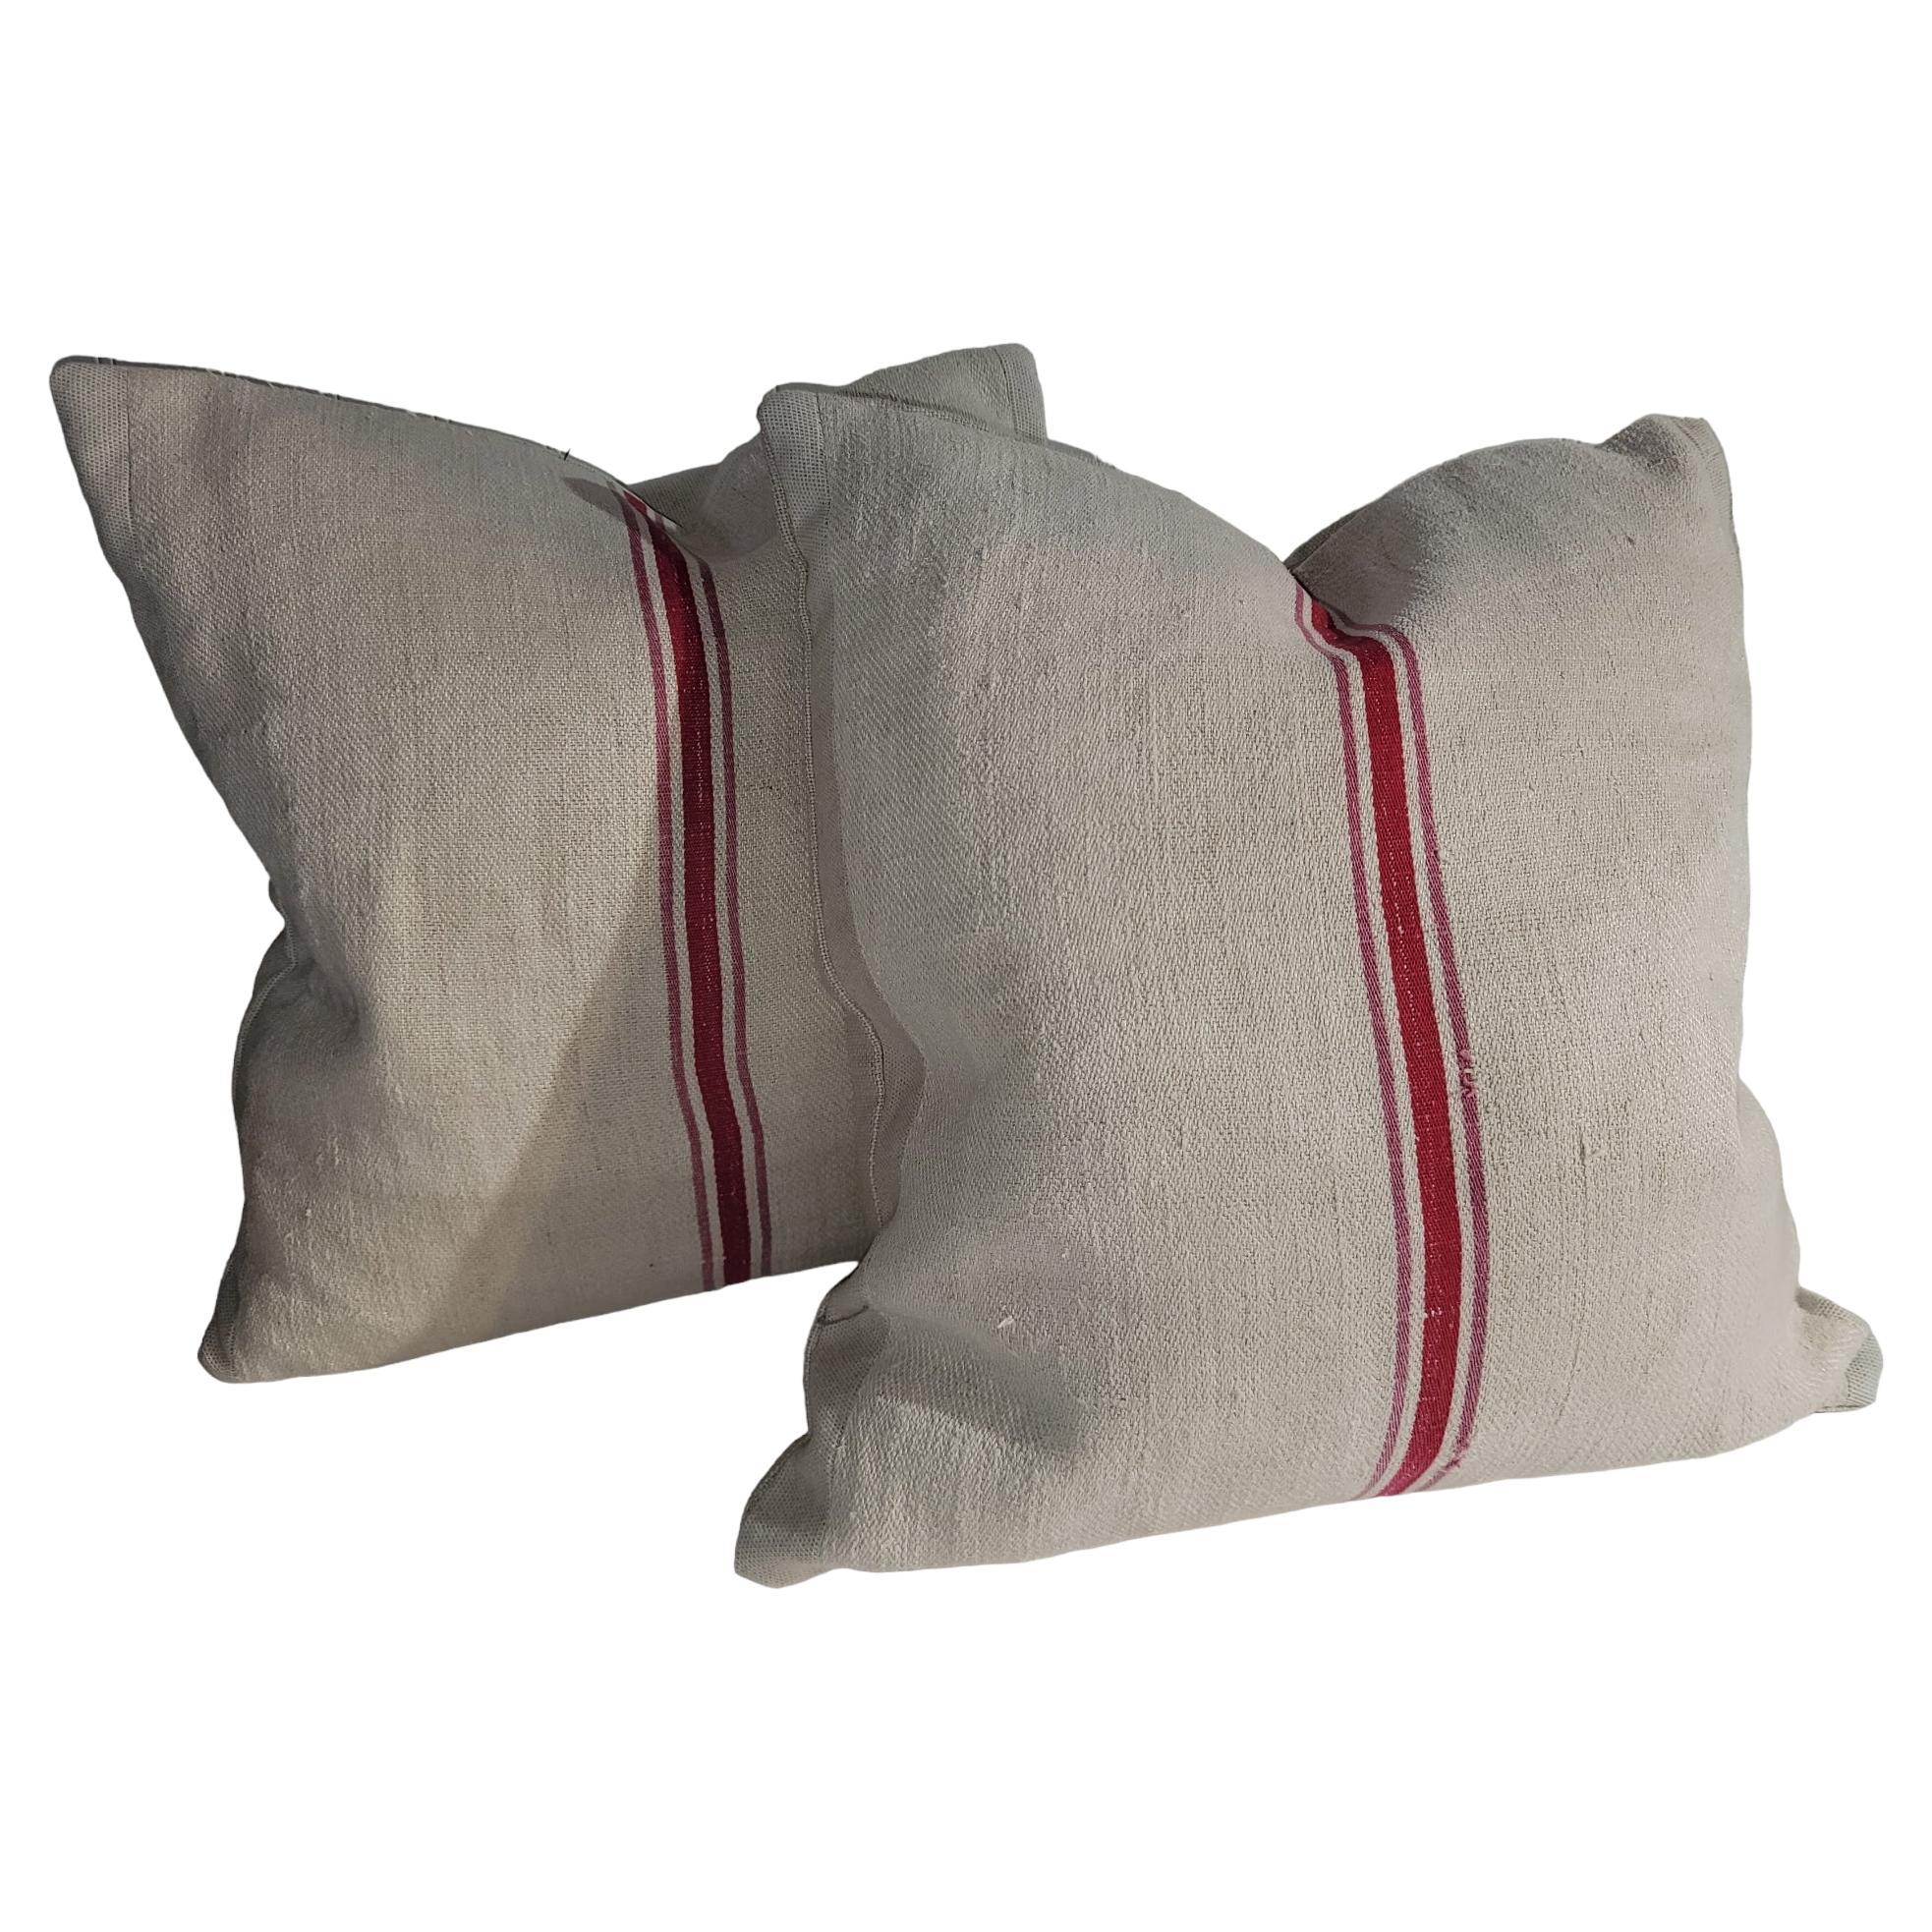 19thc New England Linen Pillows With red Stripe For Sale